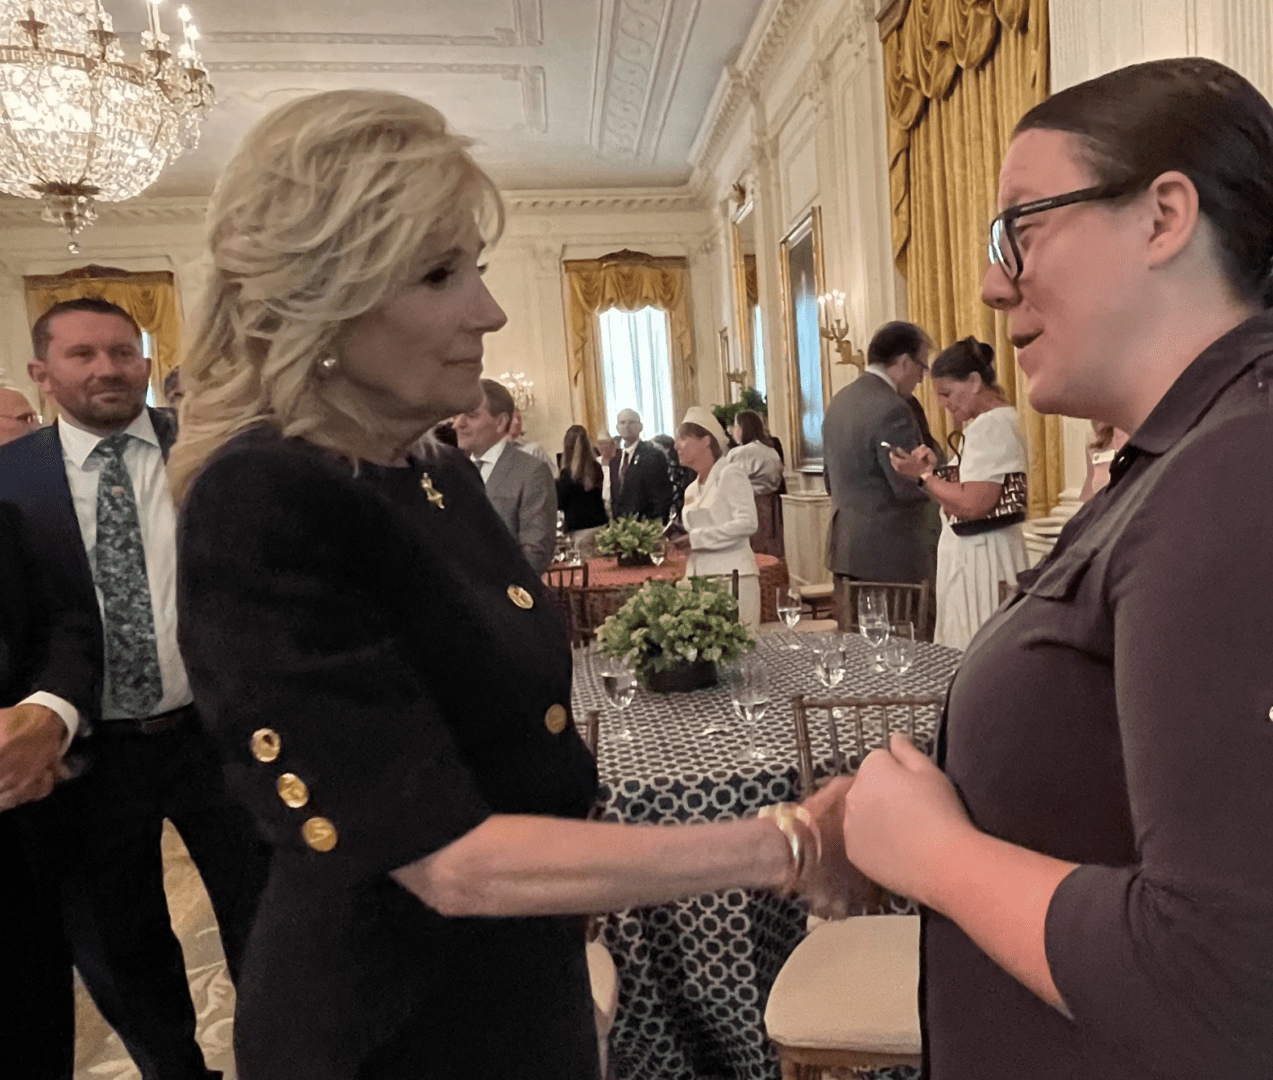 A woman is shaking hands with another woman in a room.